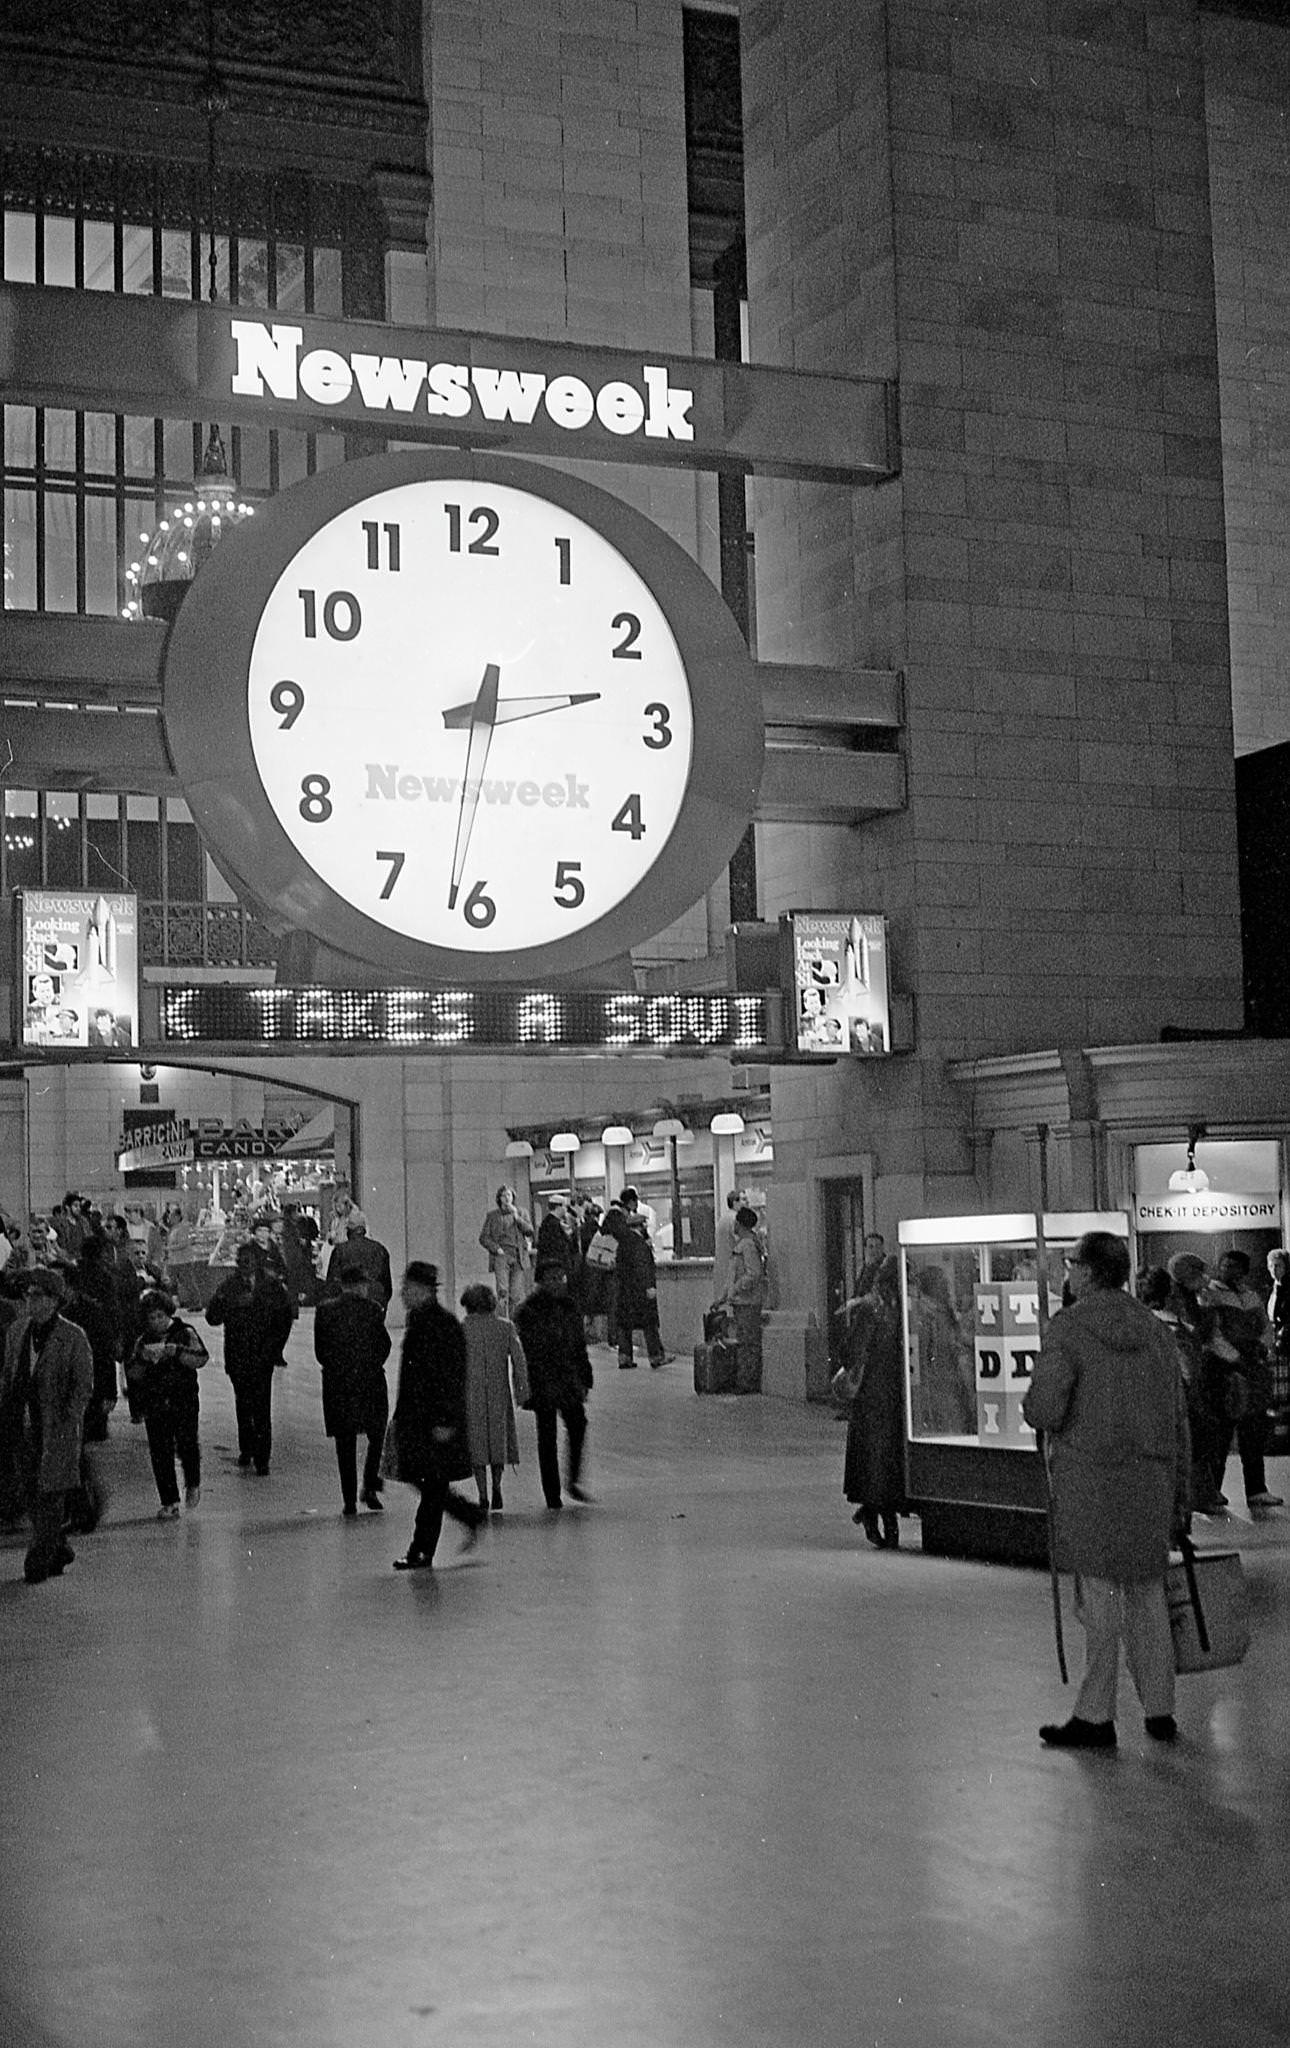 Newsweek Clock At Grand Central Station, View Of Commuters Passing Under The Clock, Manhattan, 1981